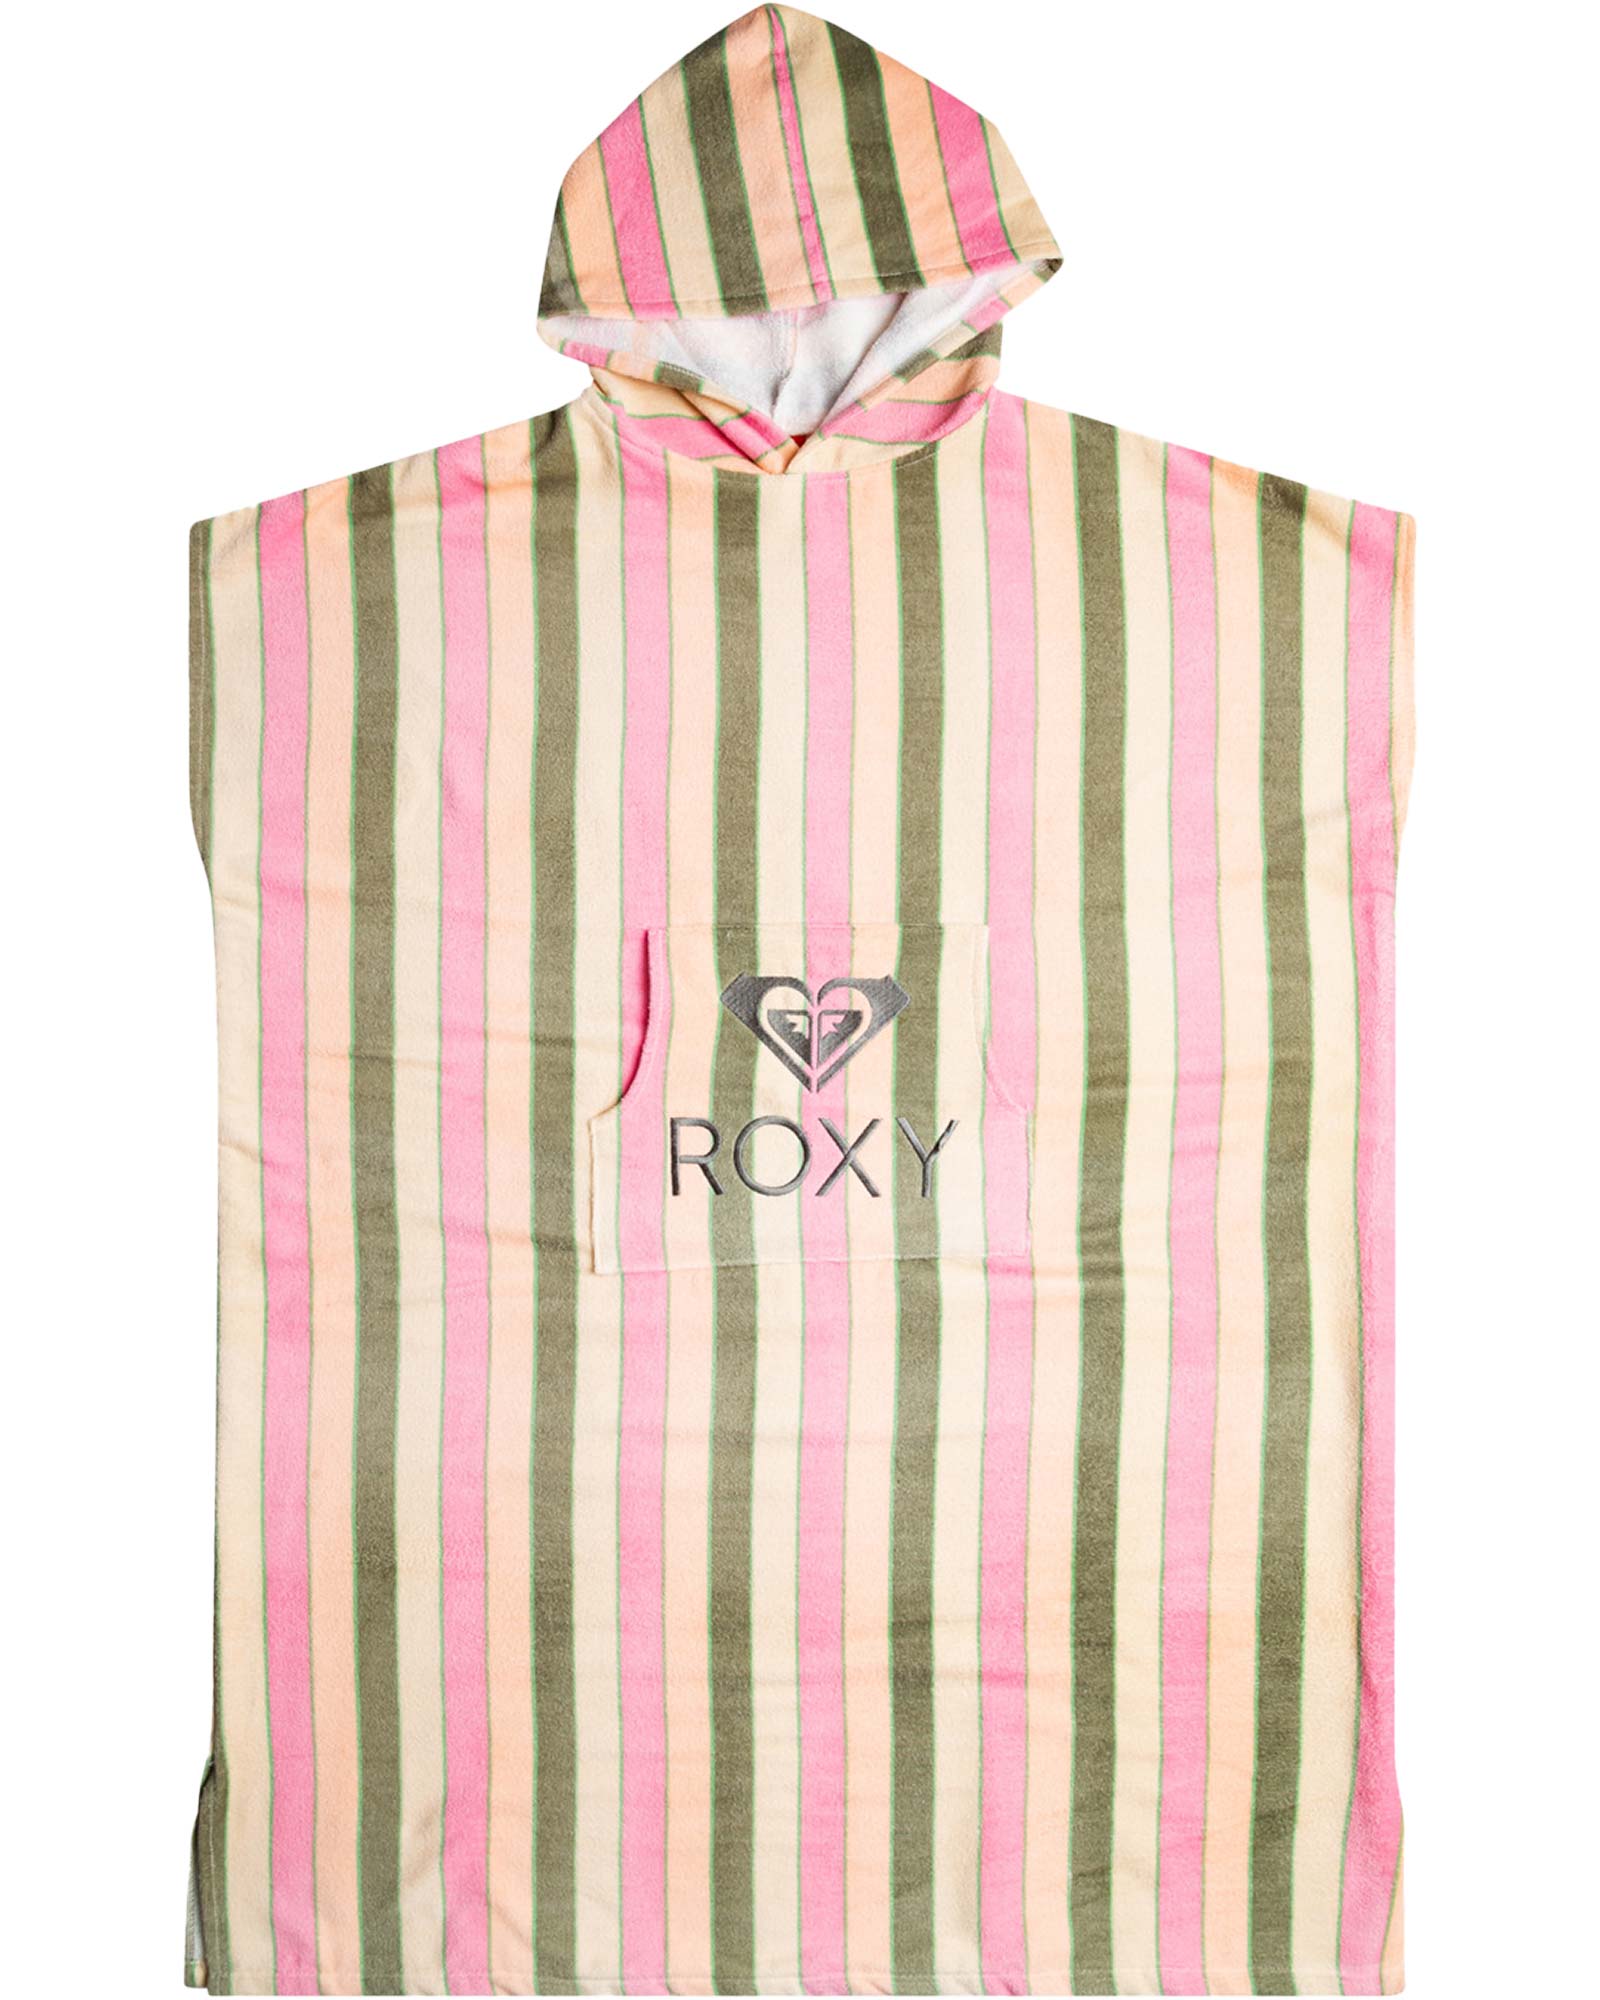 Roxy Stay Magical Printed Towel